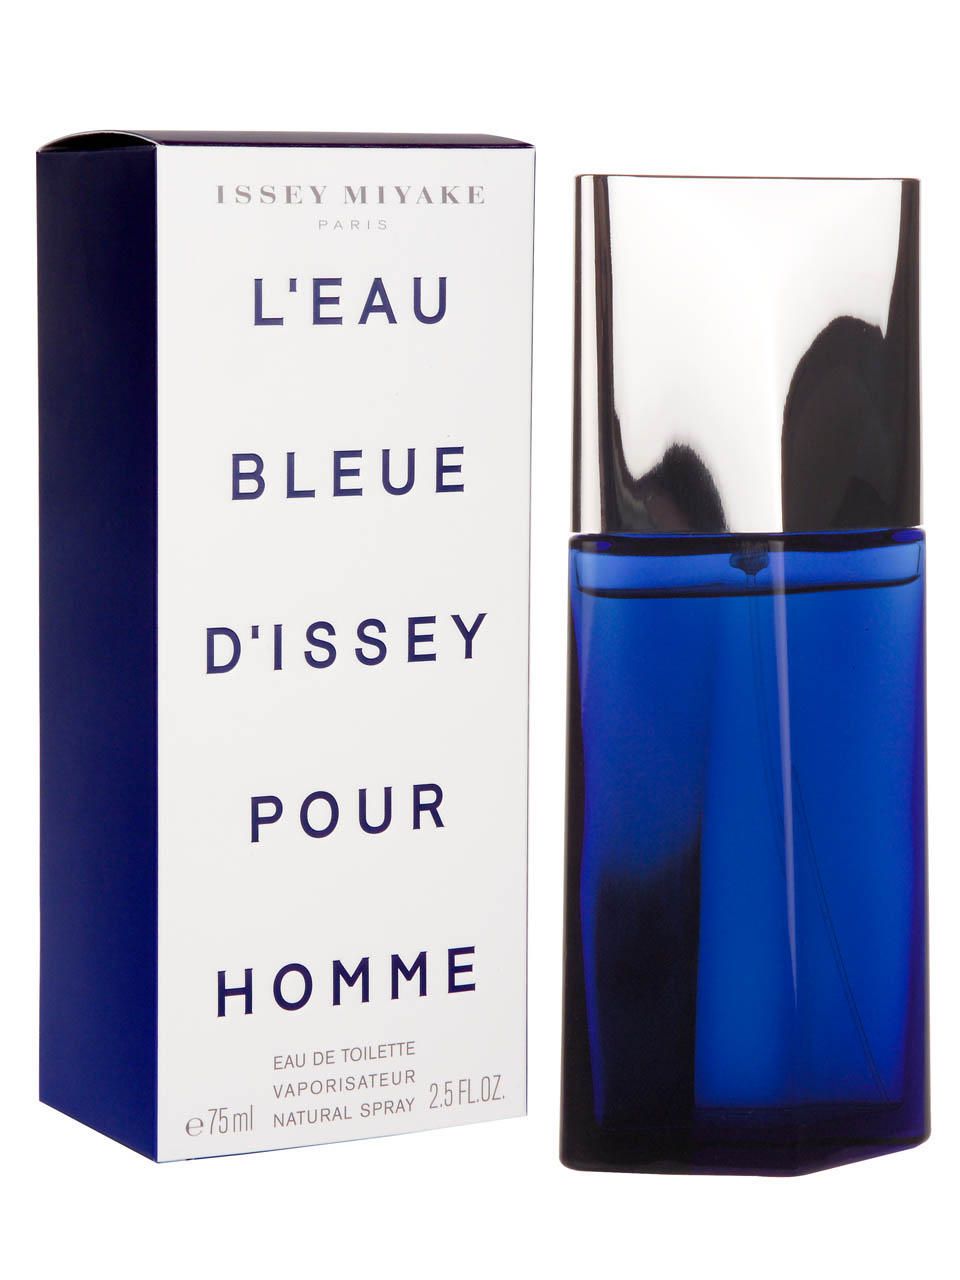 ISSEY MIYAKE L'EAU BLEUE D'ISSEY POUR HOMME